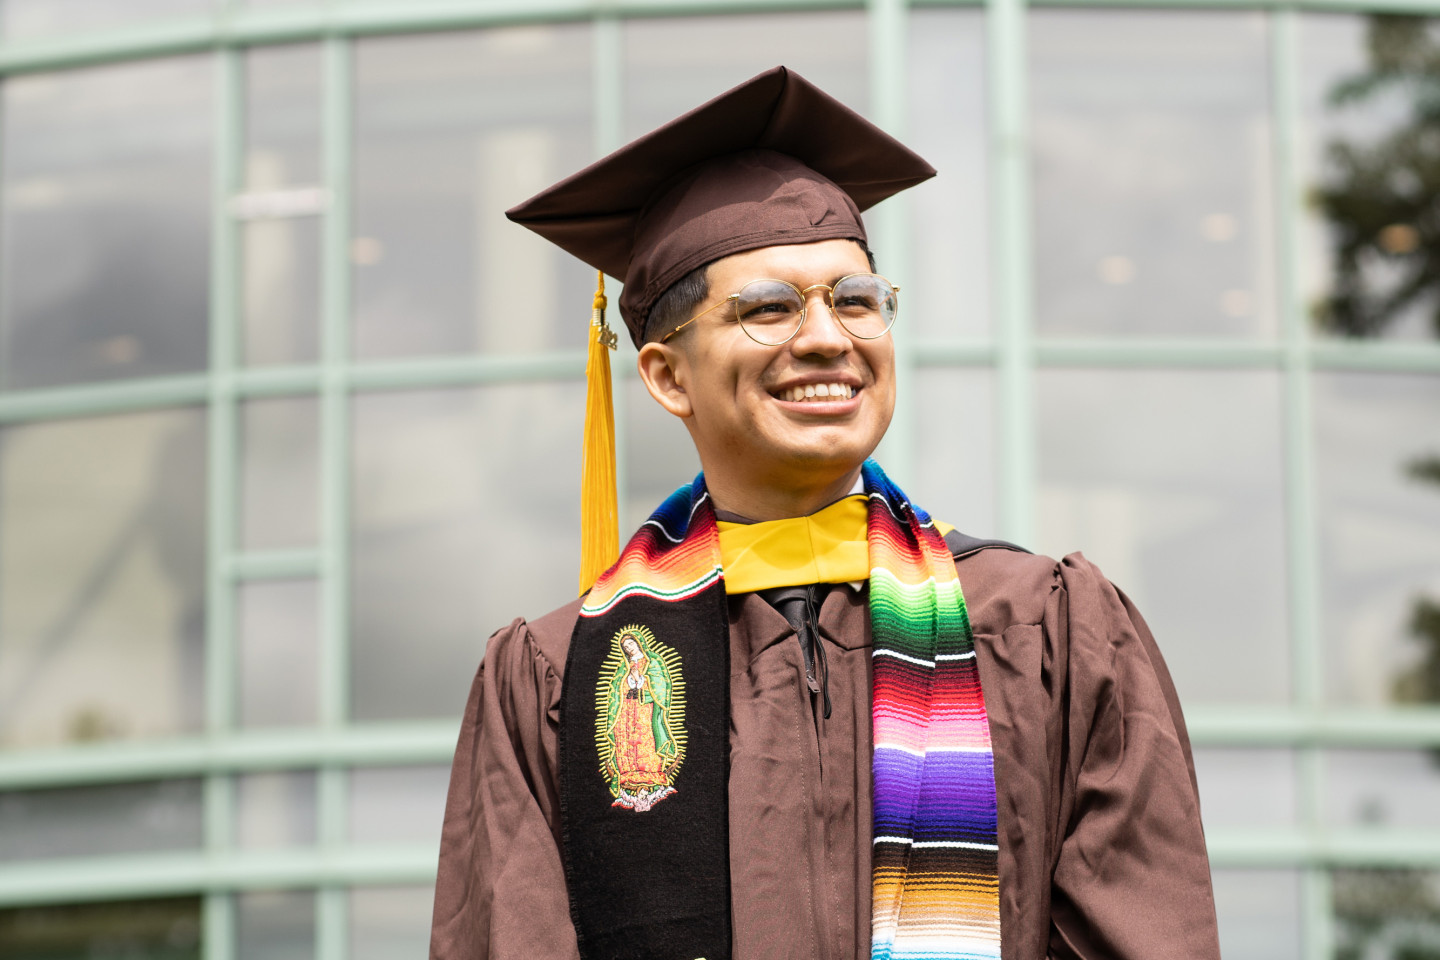 A portrait of Luis Angel Morales in his cap and gown.